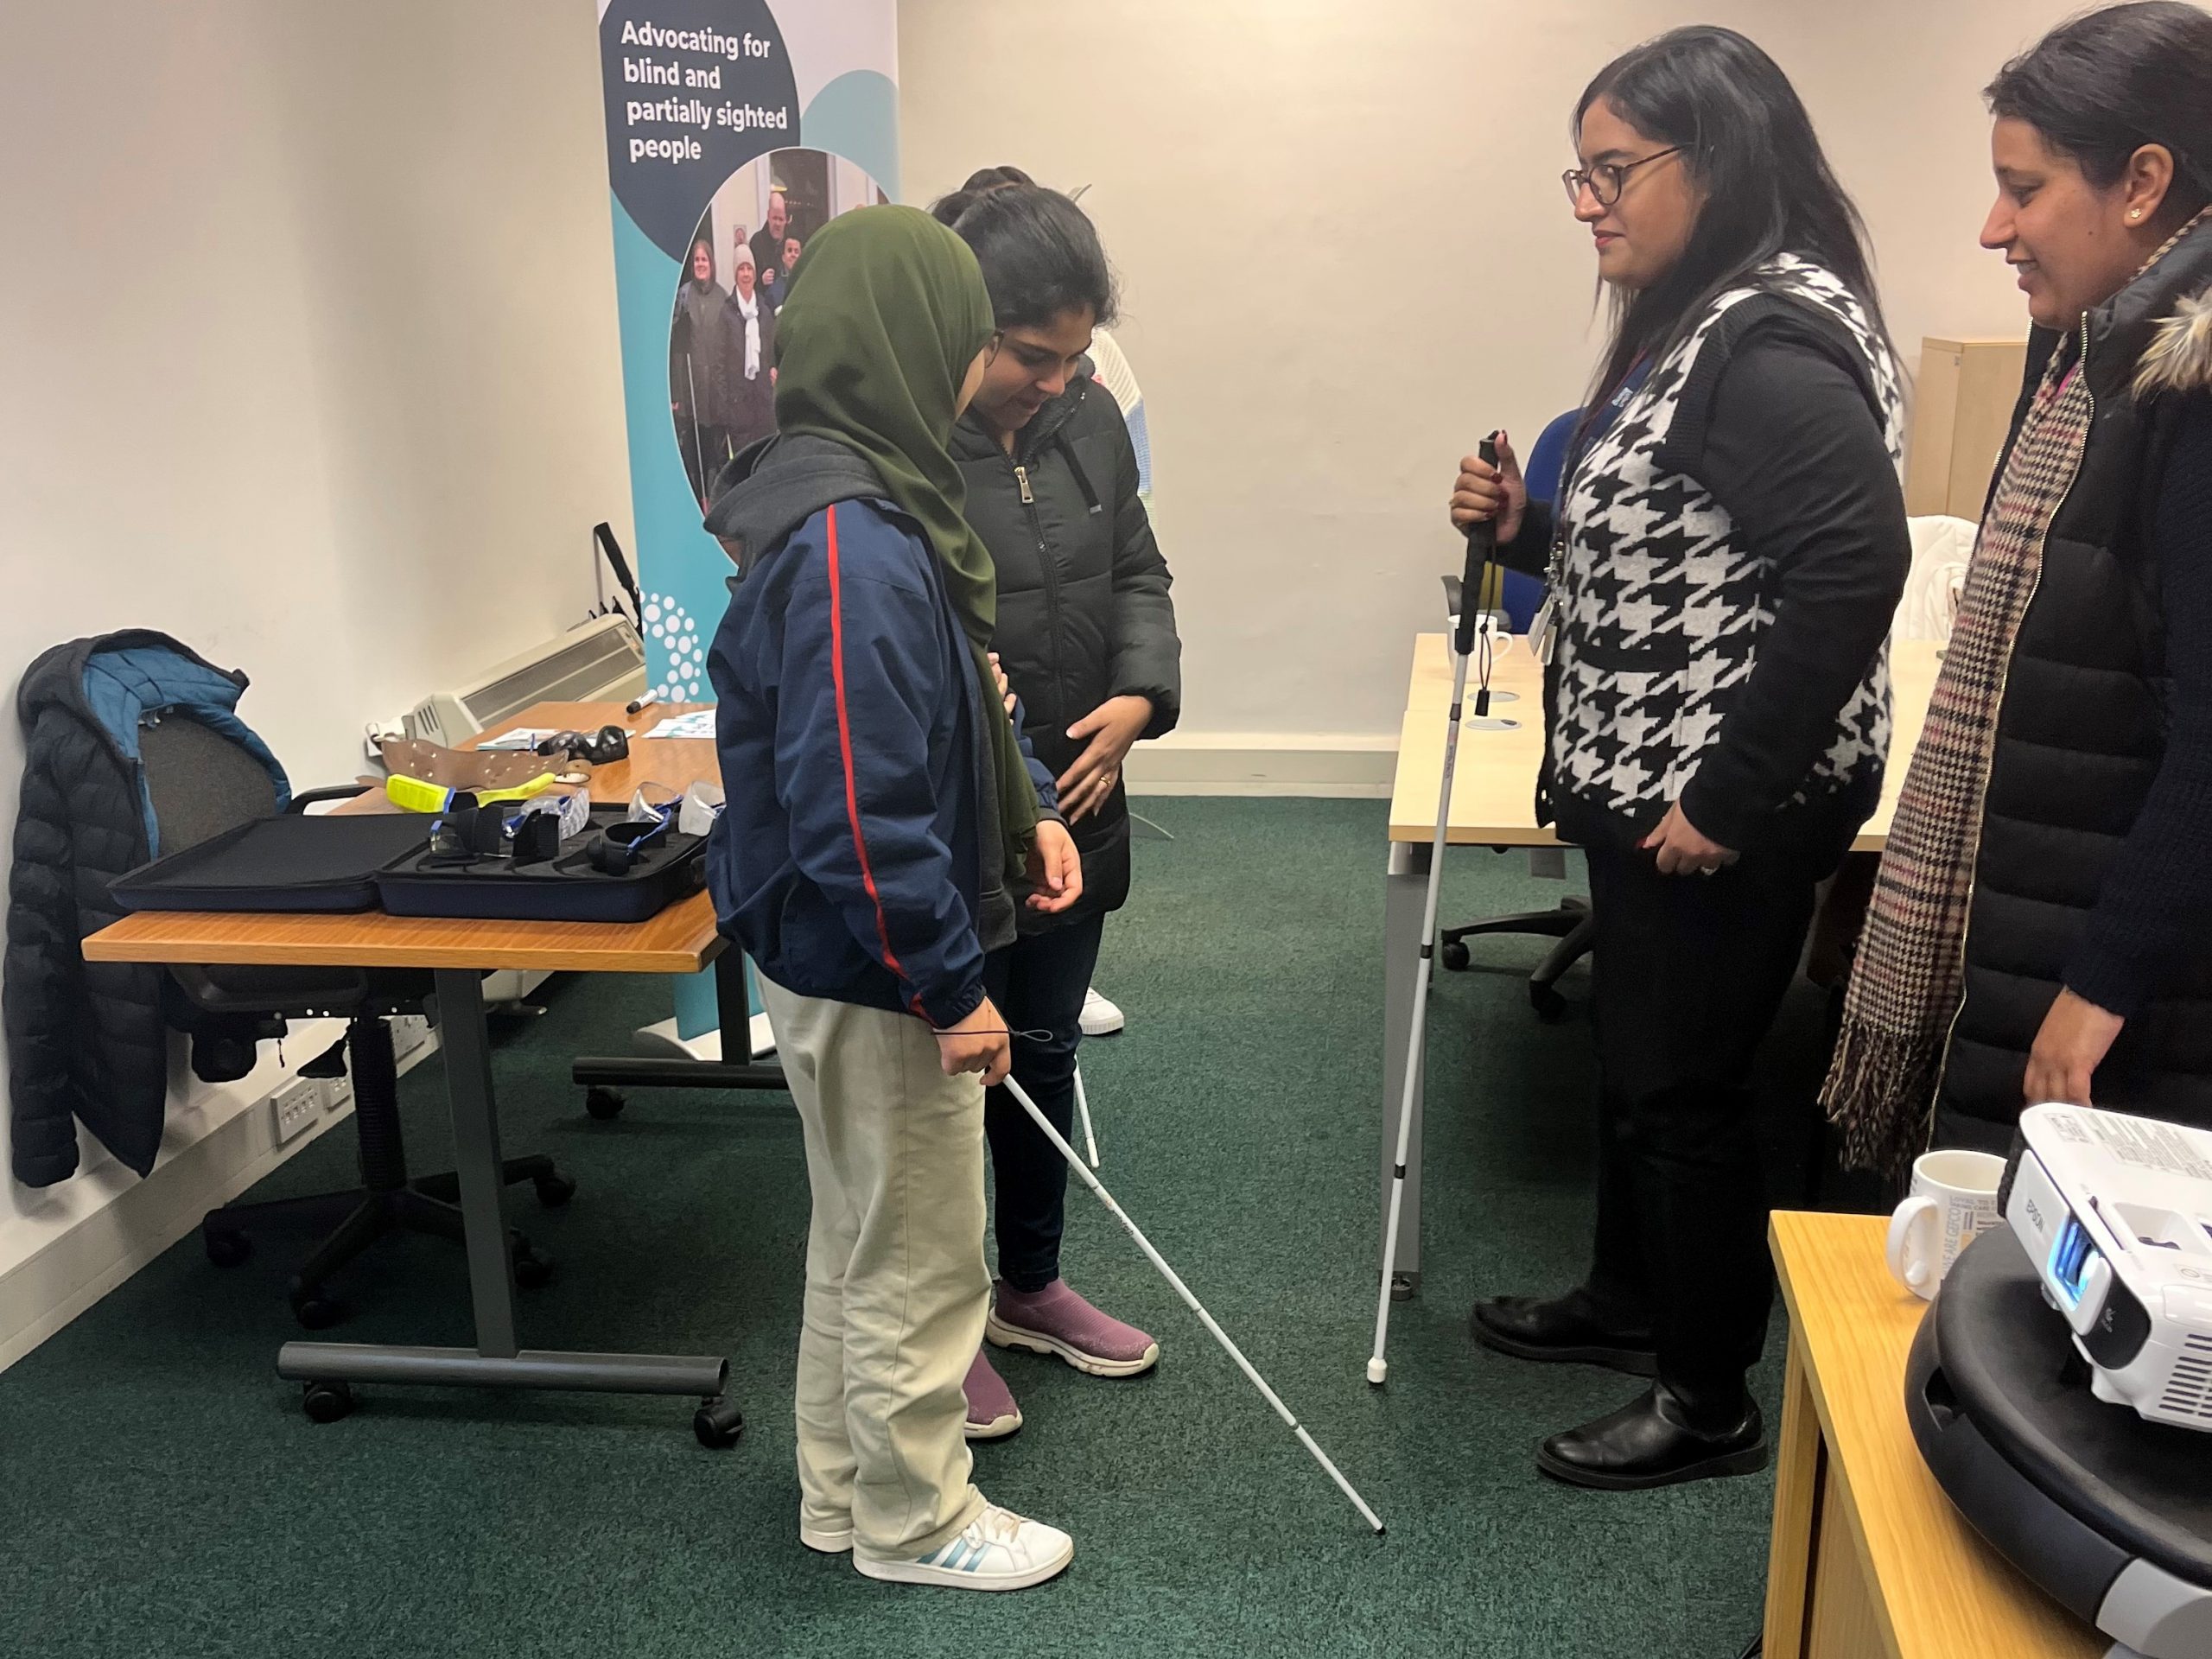 Photo shows Bedfordshire SLC members delivering a vision awareness session to Ethos Farm employees. There are 4 woman in camera shot. One is holding a white cane and showing another how to be a sighted guide. The other two are standing in front watching and listening.